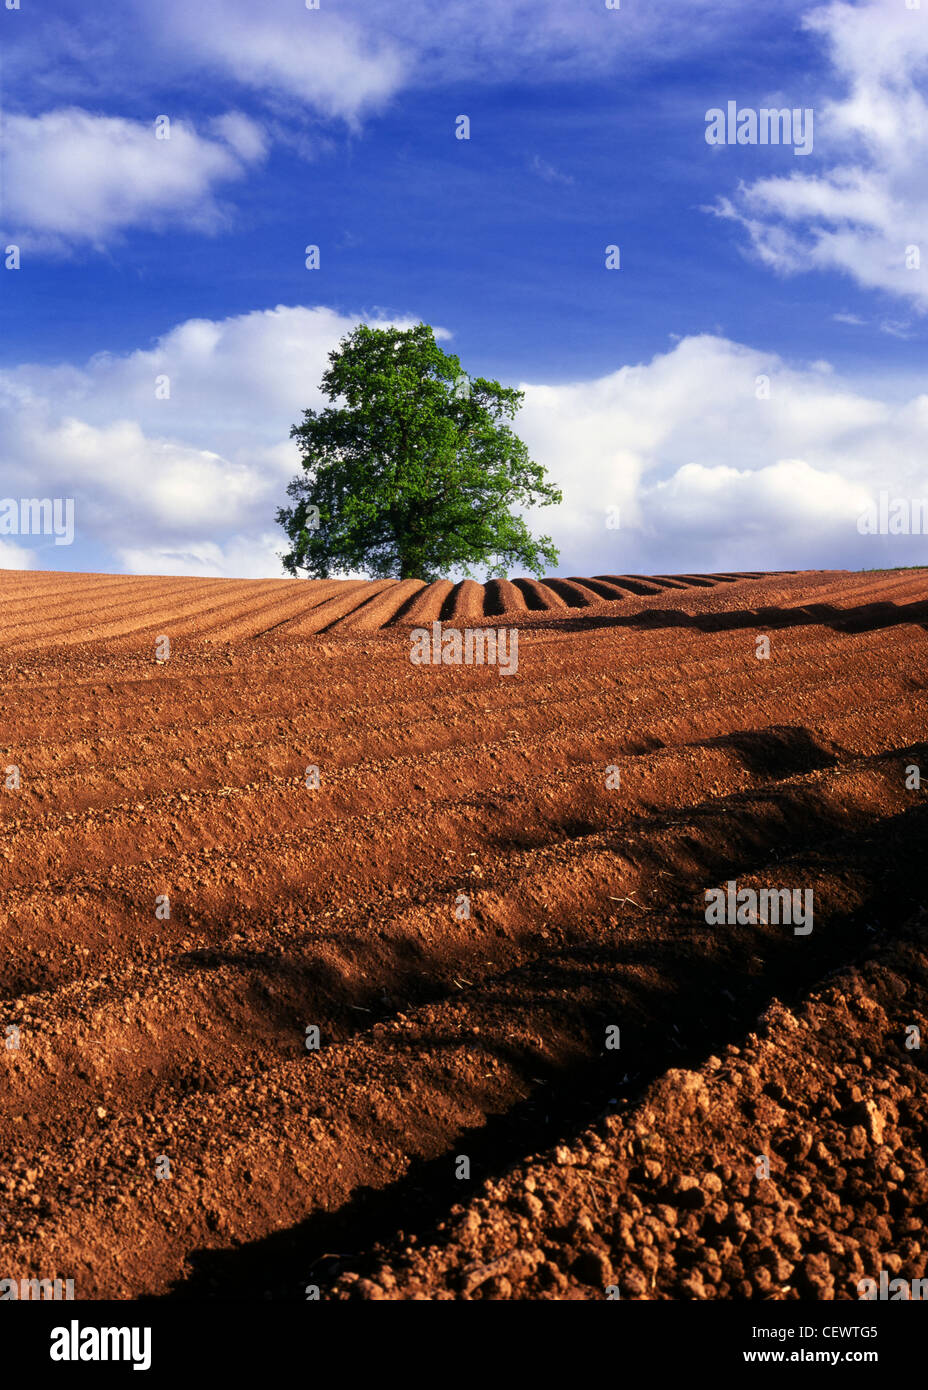 Oak tree in a ploughed field in Flaxley. Although Flaxley is a pleasant and picturesque area, it has a strong industrial past, n Stock Photo